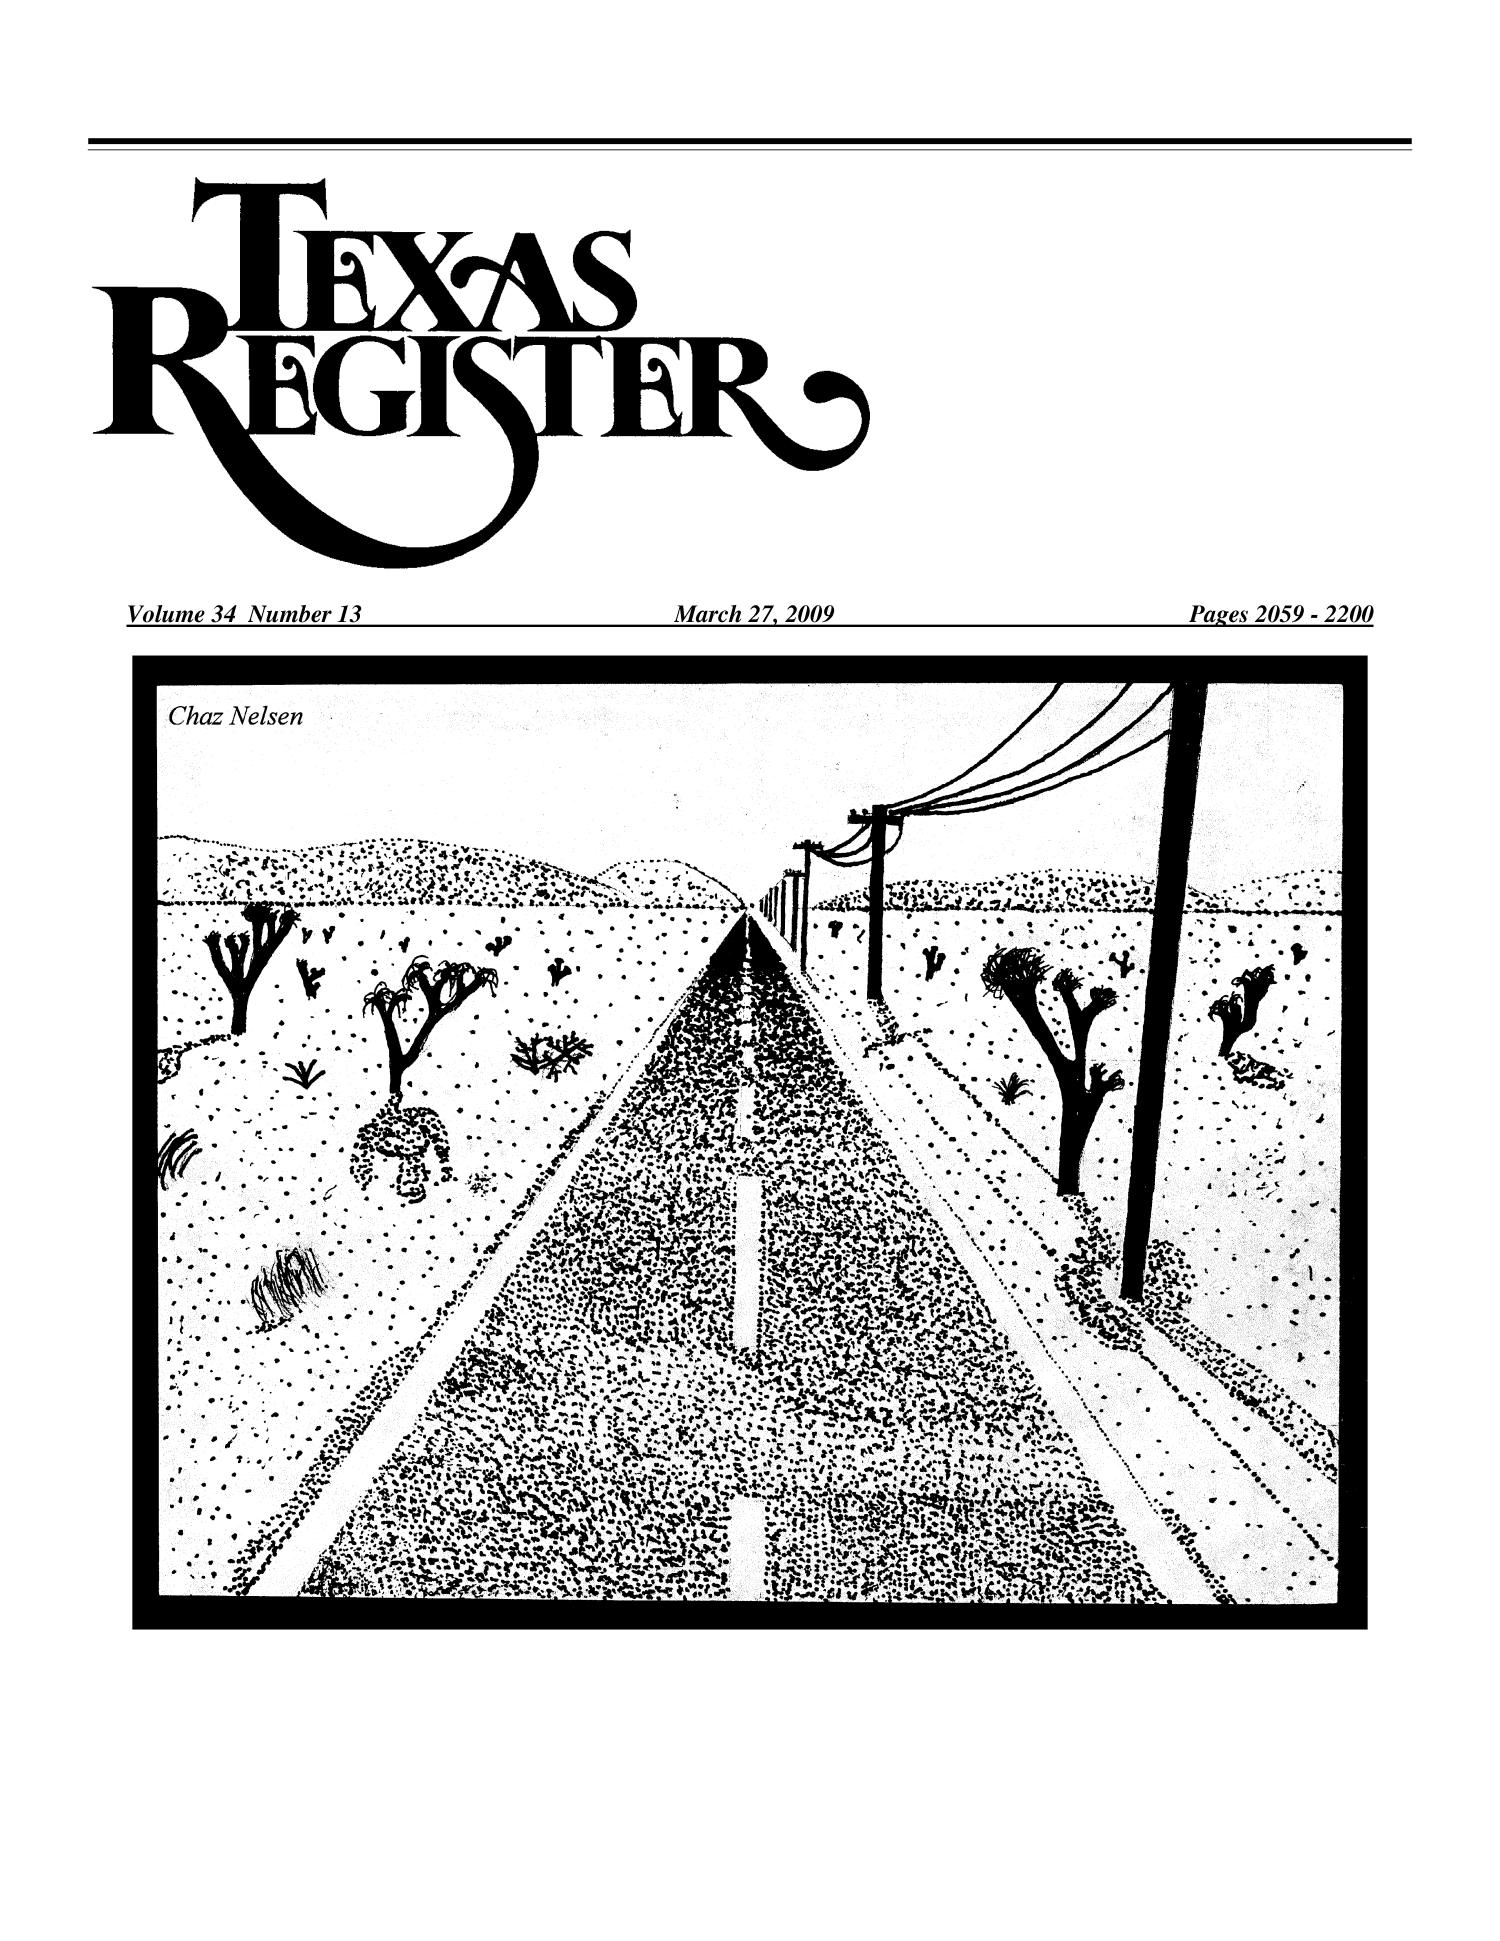 Texas Register, Volume 34, Number 13, Pages 2059-2200, March 27, 2009
                                                
                                                    2059
                                                